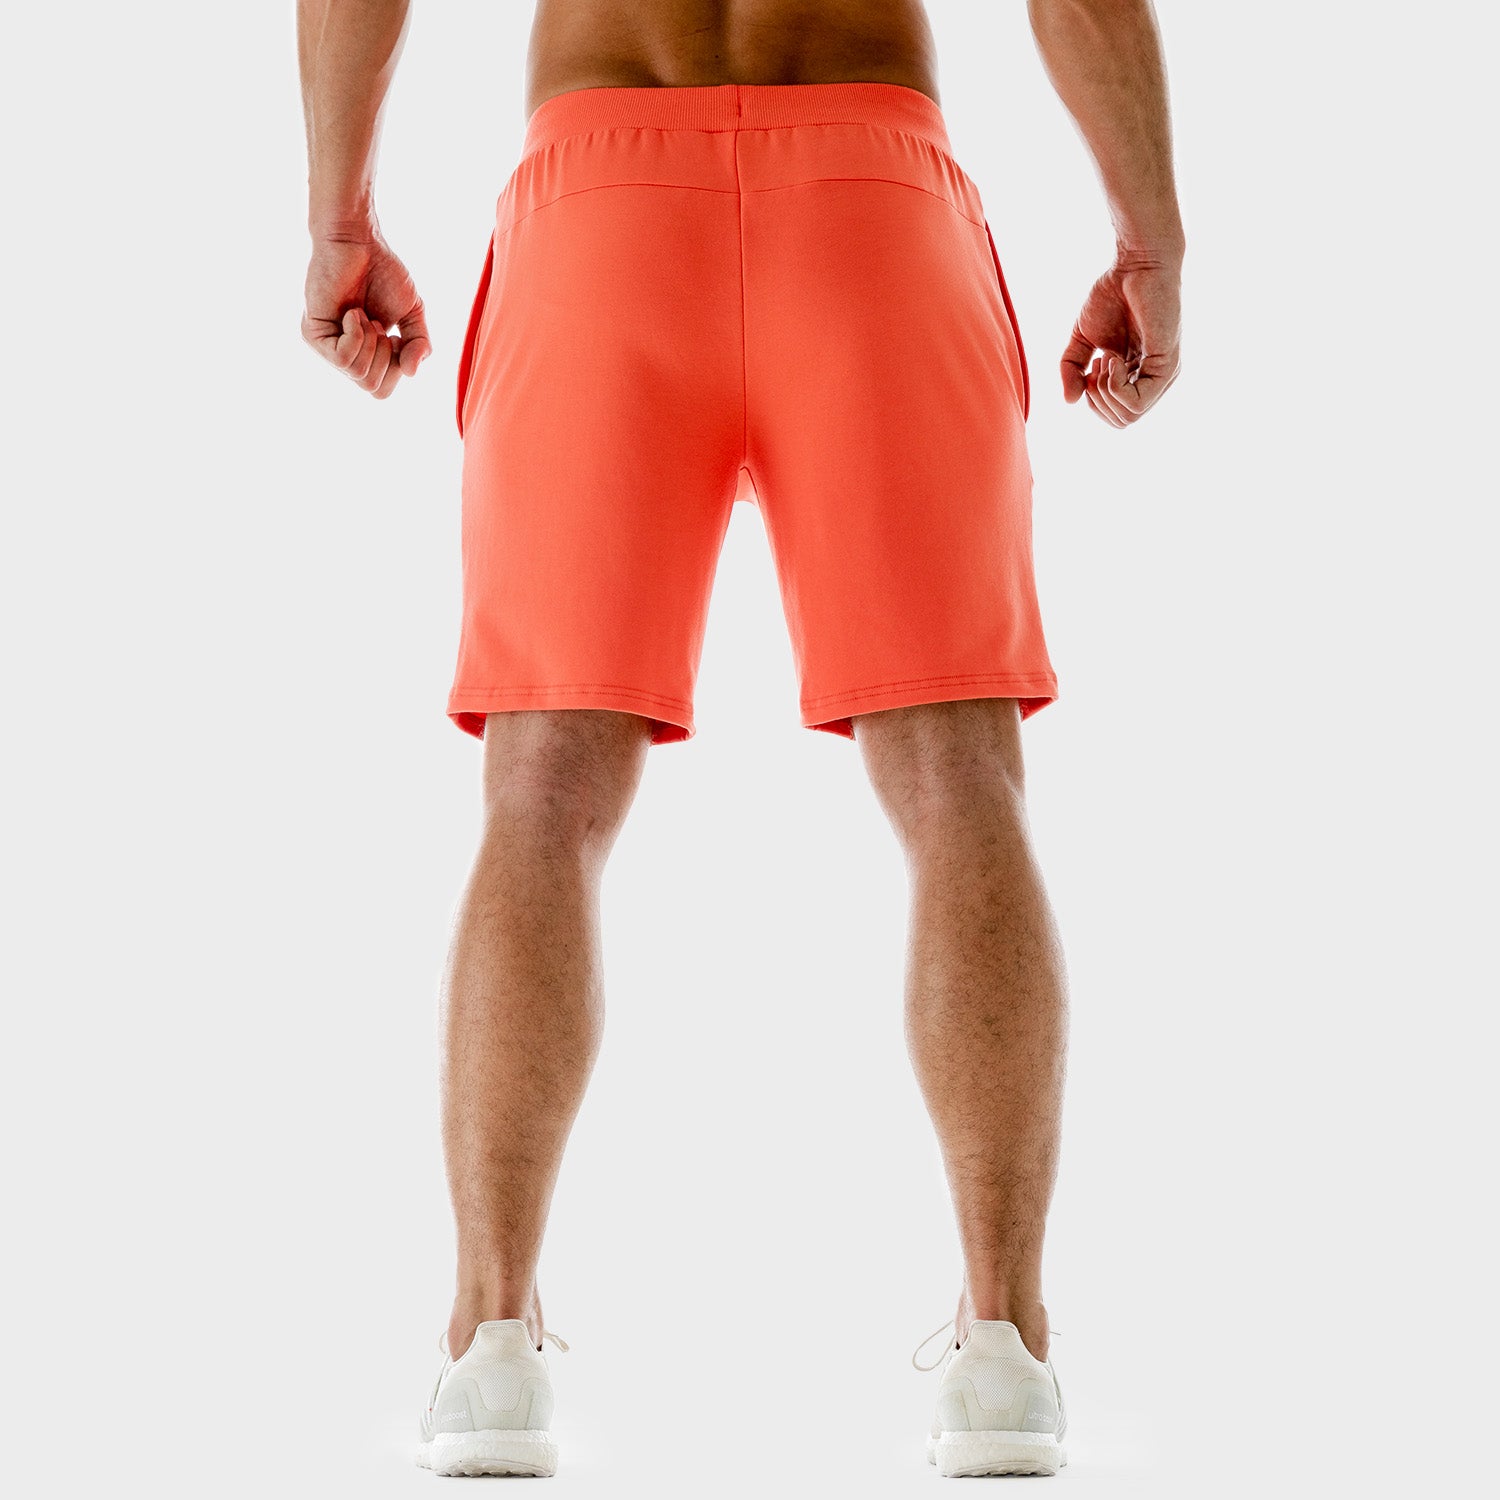 squatwolf-workout-short-for-men-lab-360-jogger-shorts-hot-coral-gym-wear